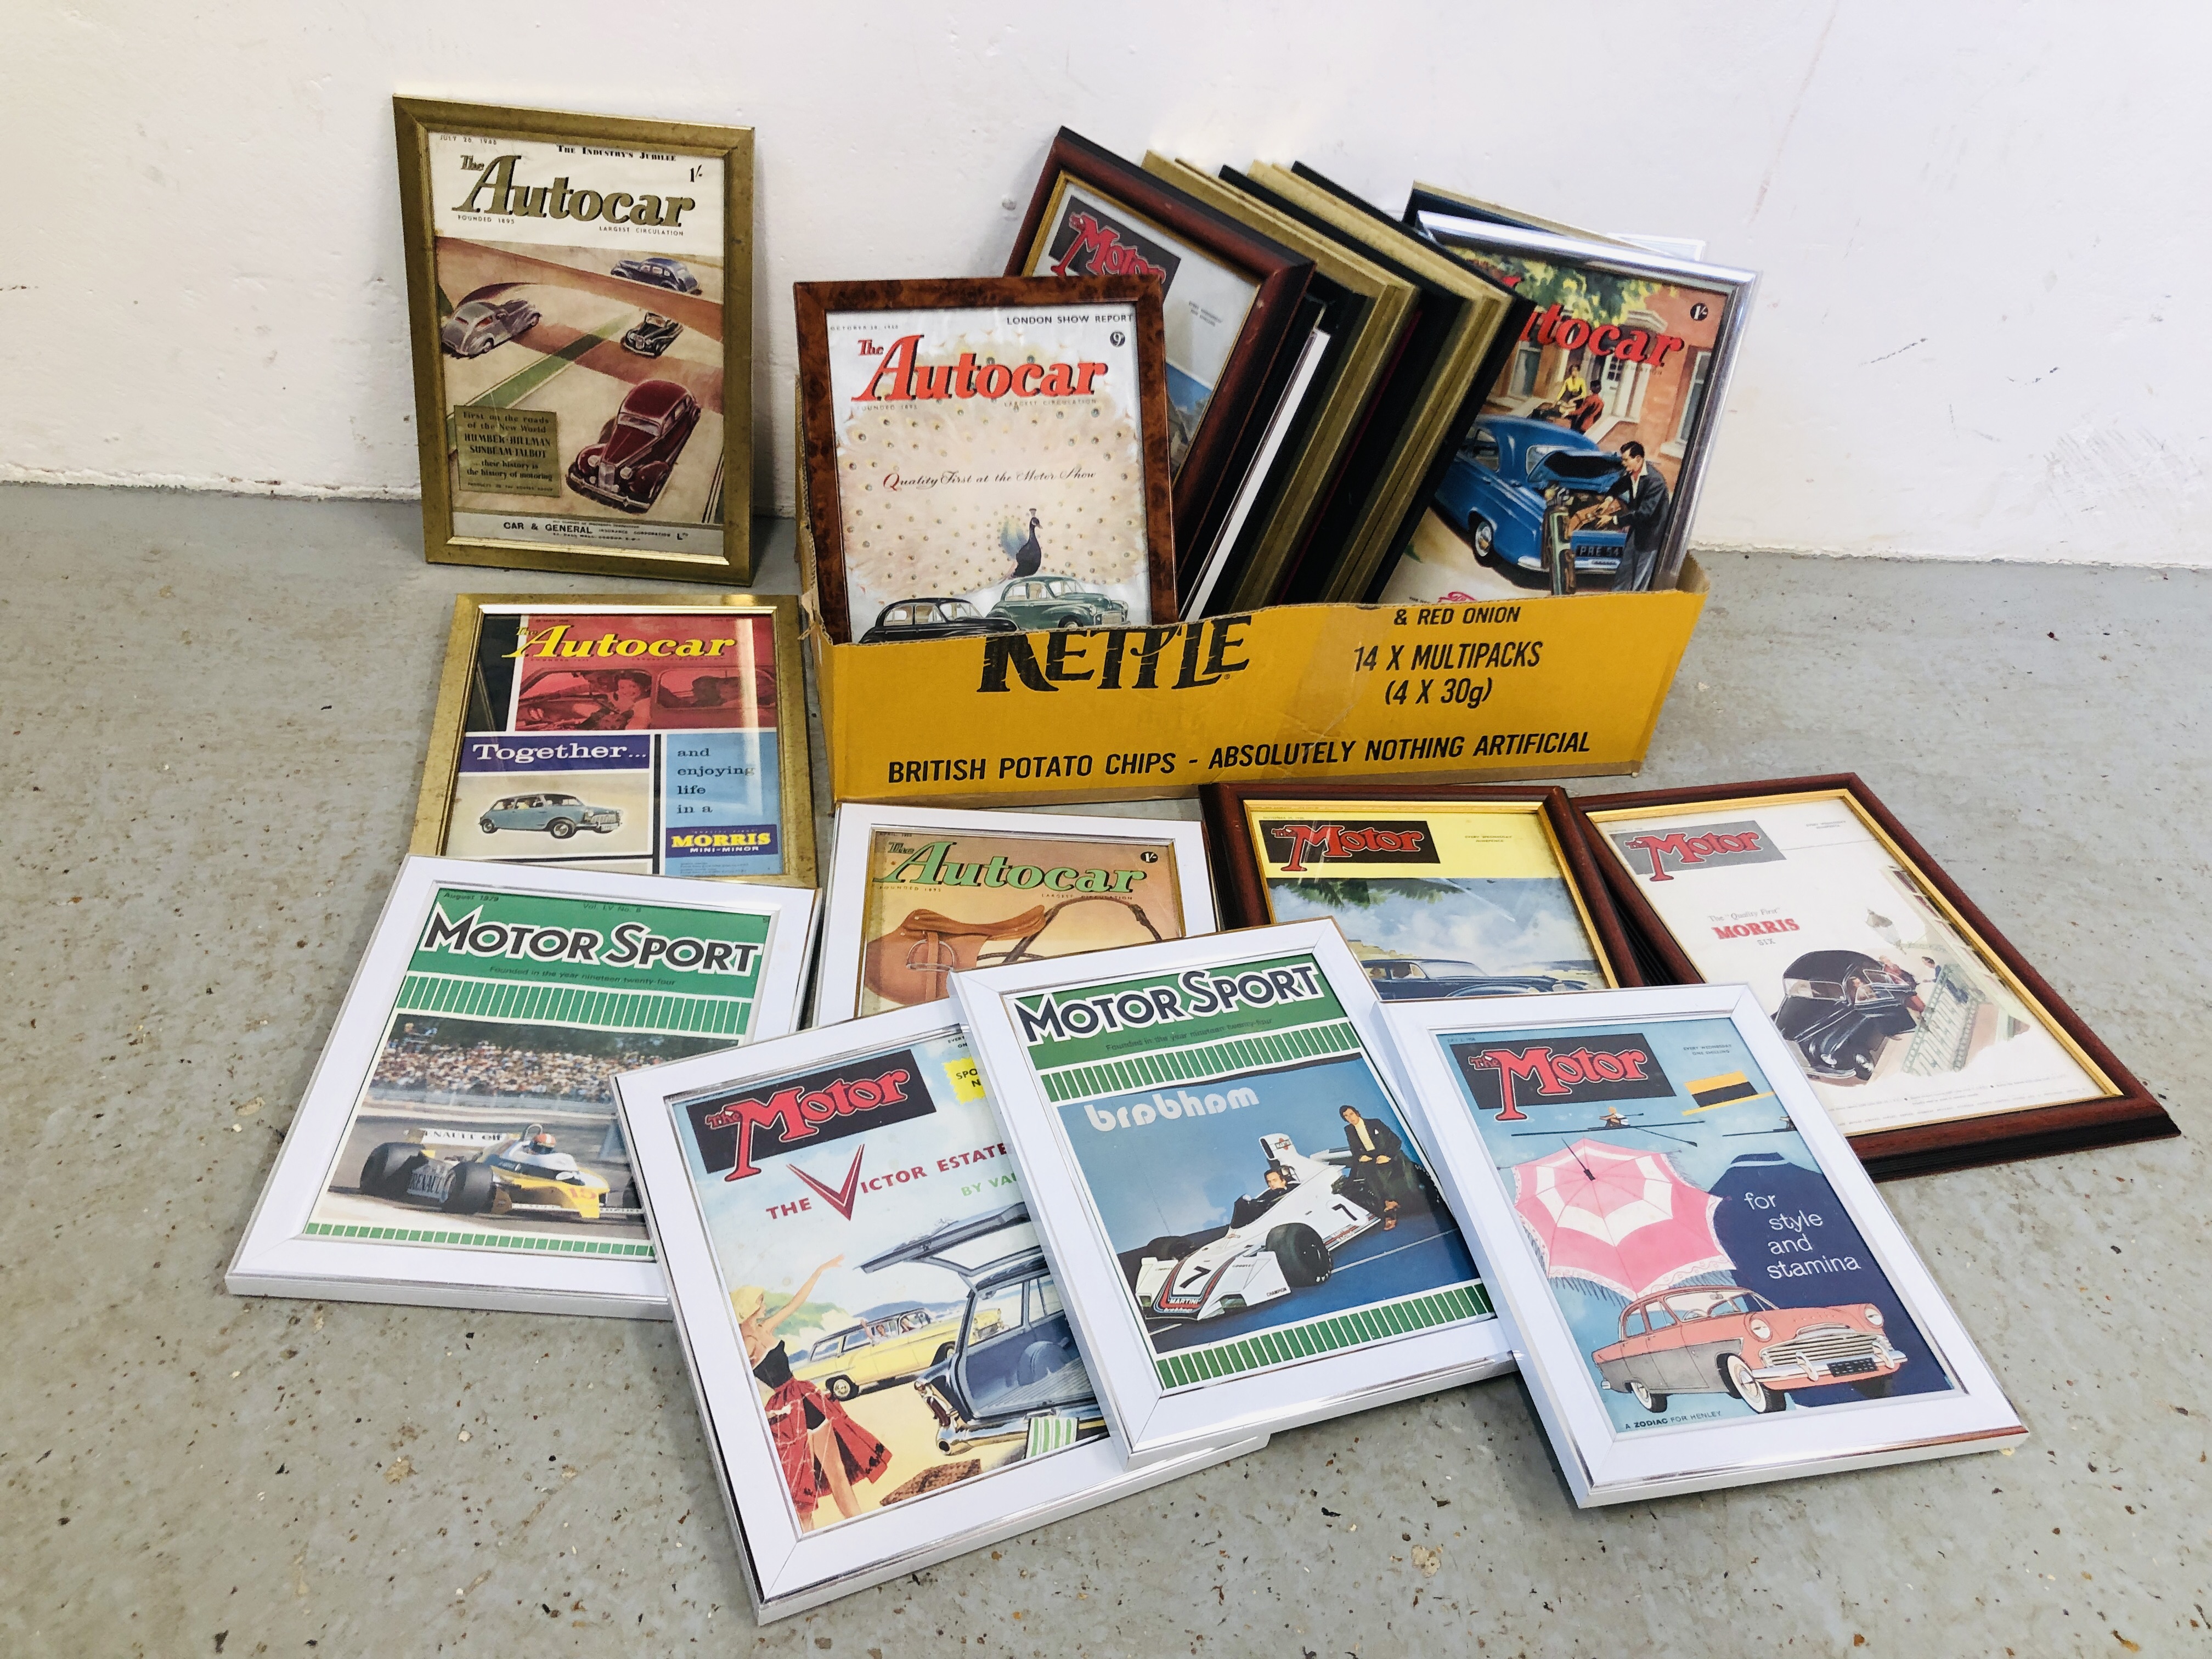 25 FRAMED MOTOR SPORT AND AUTOCAR MAGAZINE CUT OUTS FROM 1950's TO 1970's.